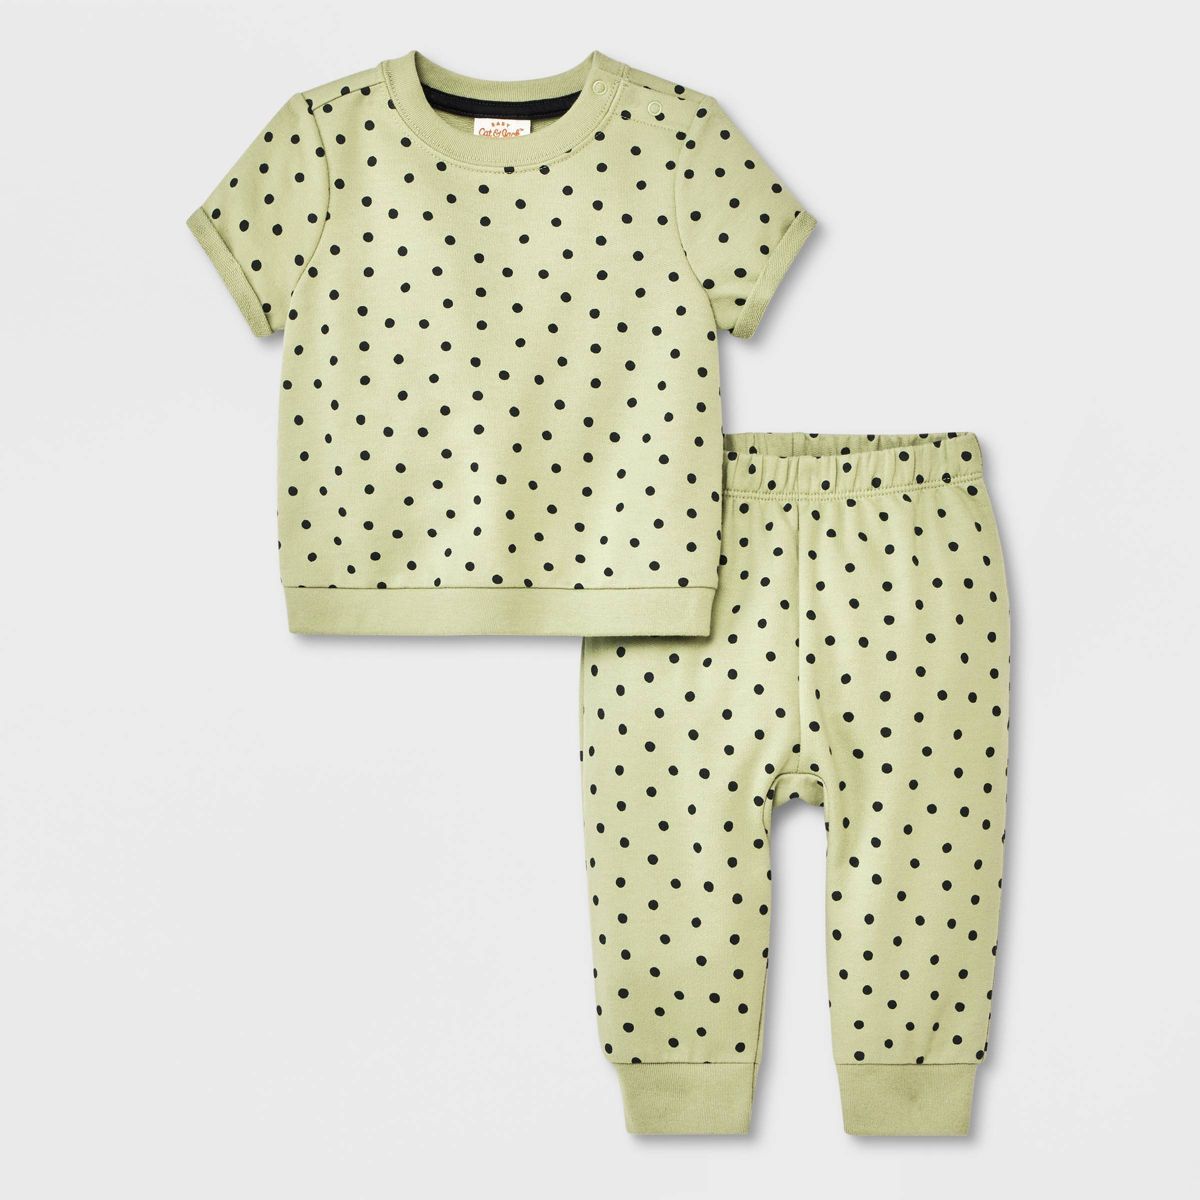 Baby 2pc French Terry Short Sleeve Top & Bottom Set - Cat & Jack™ Green | Target